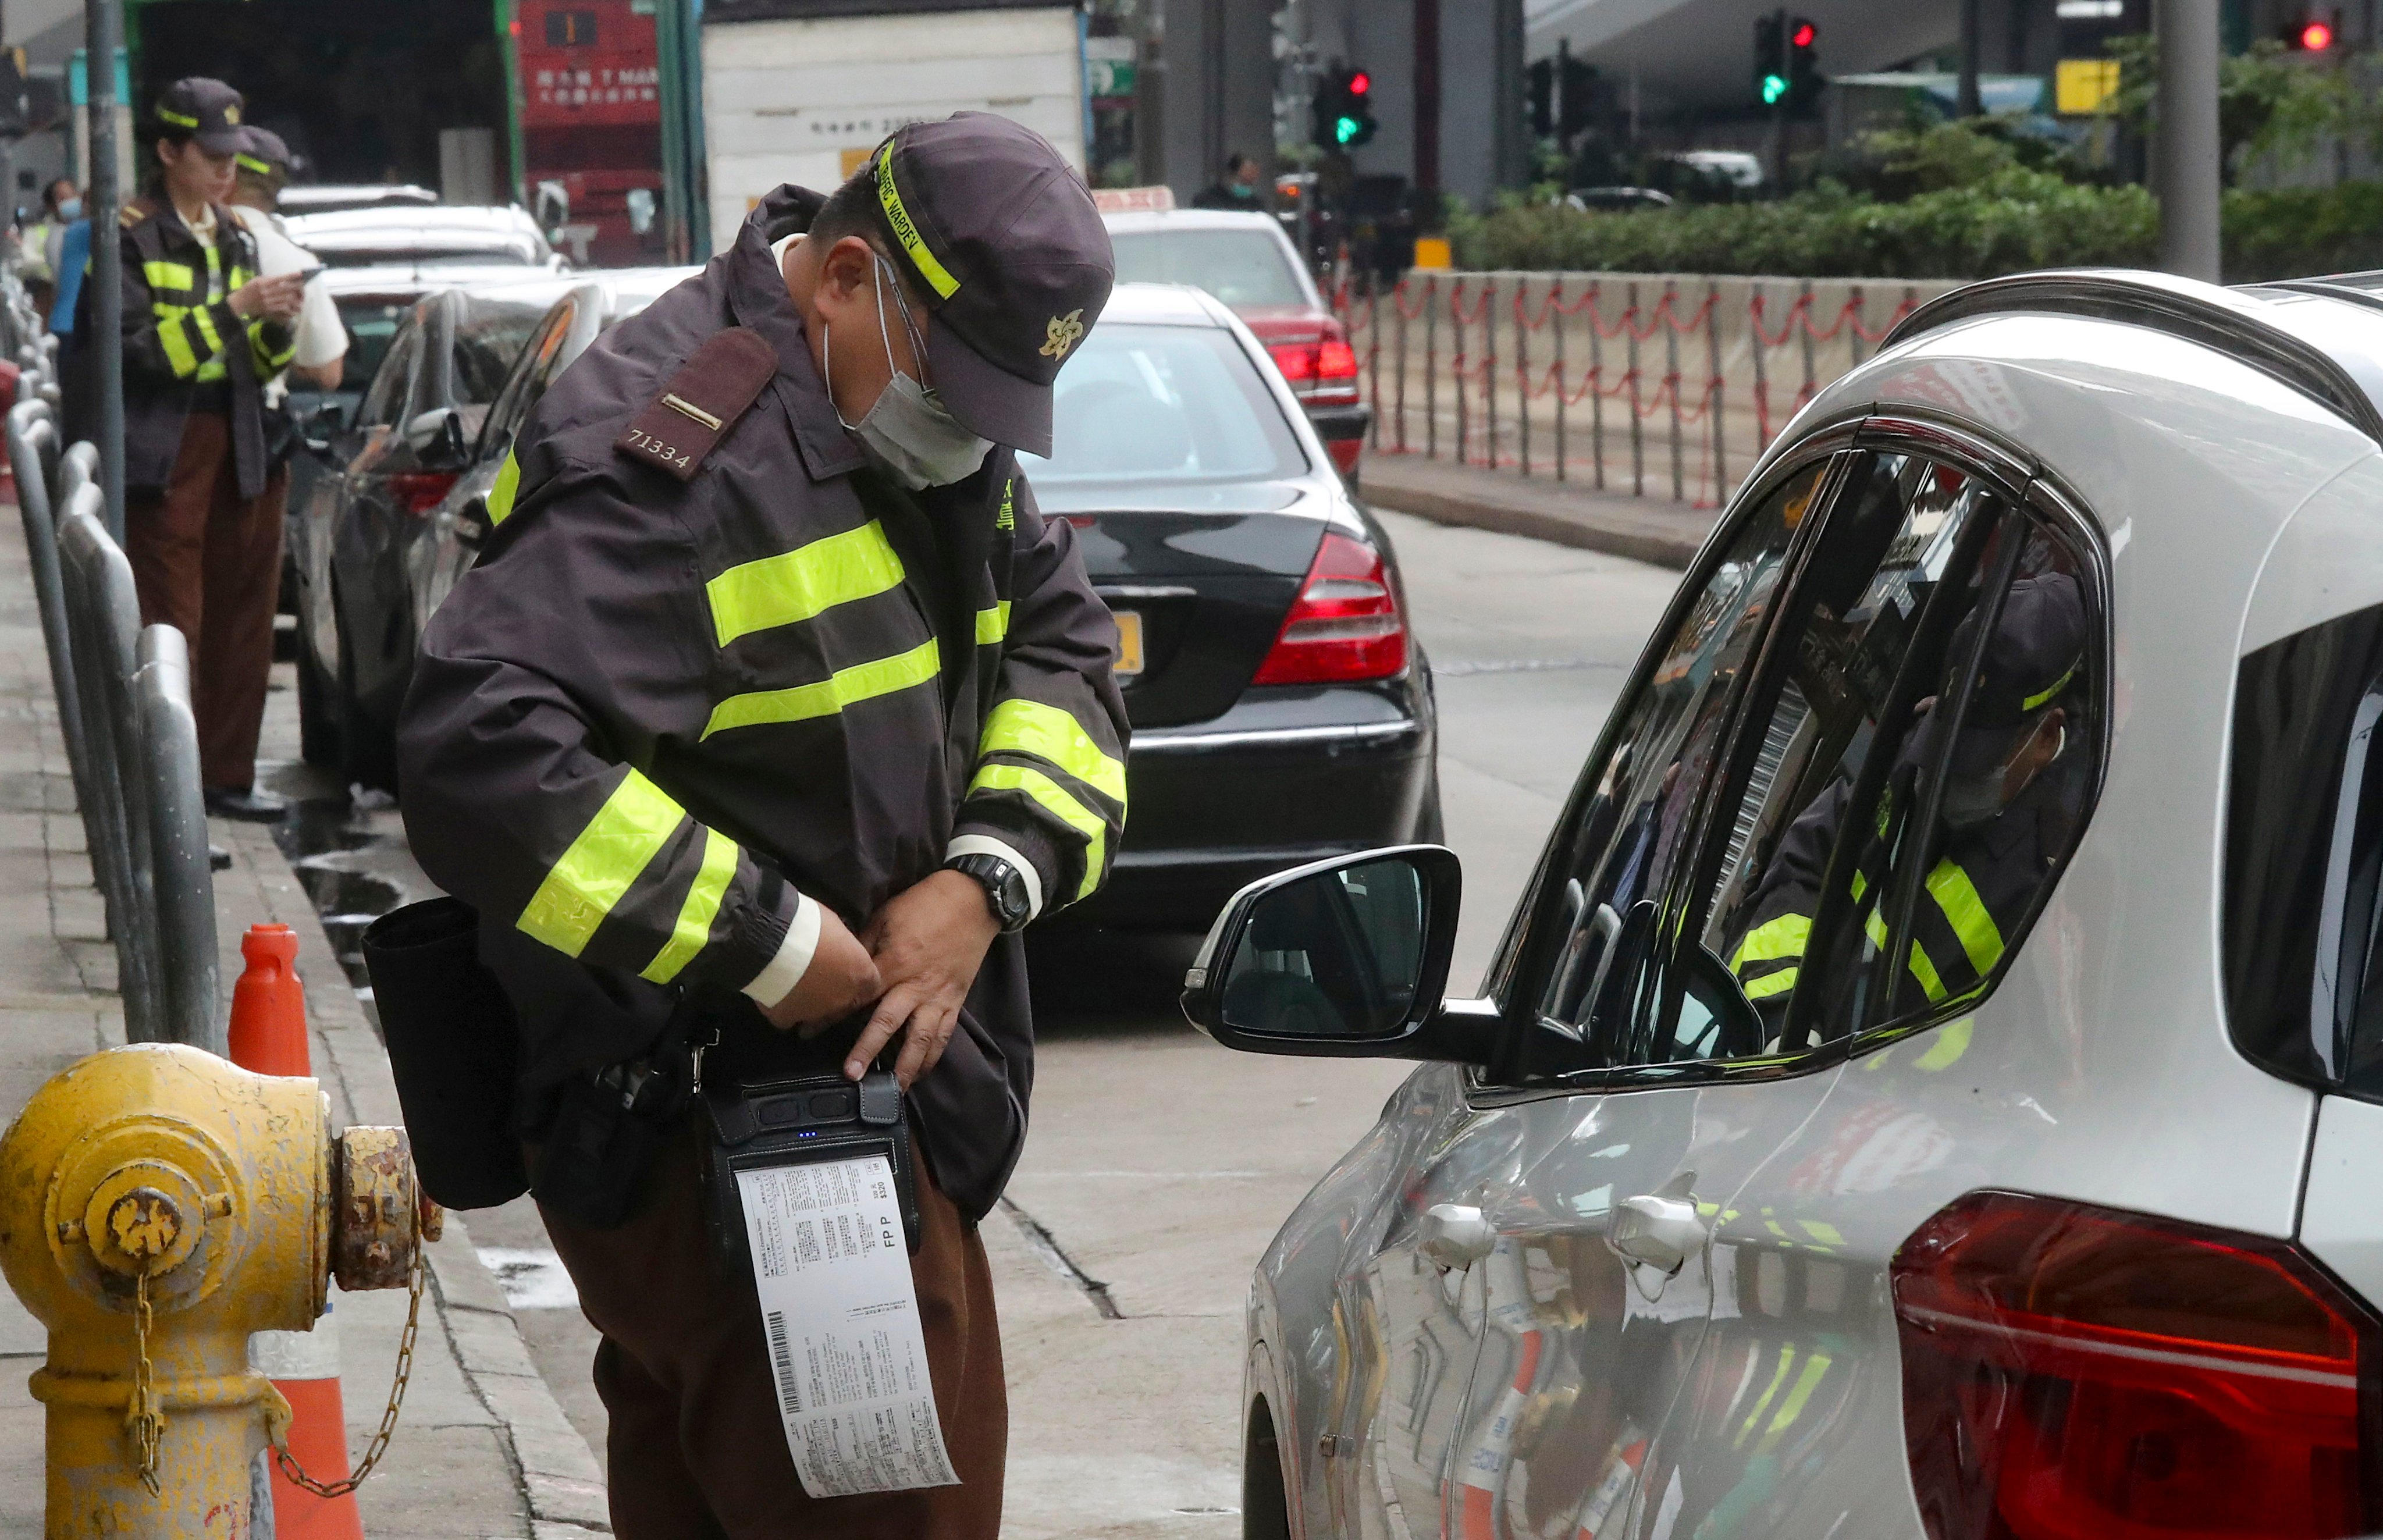 A traffic warden hands out tickets to illegally parked cars in Sheung Wan. Photo: K. Y. Cheng